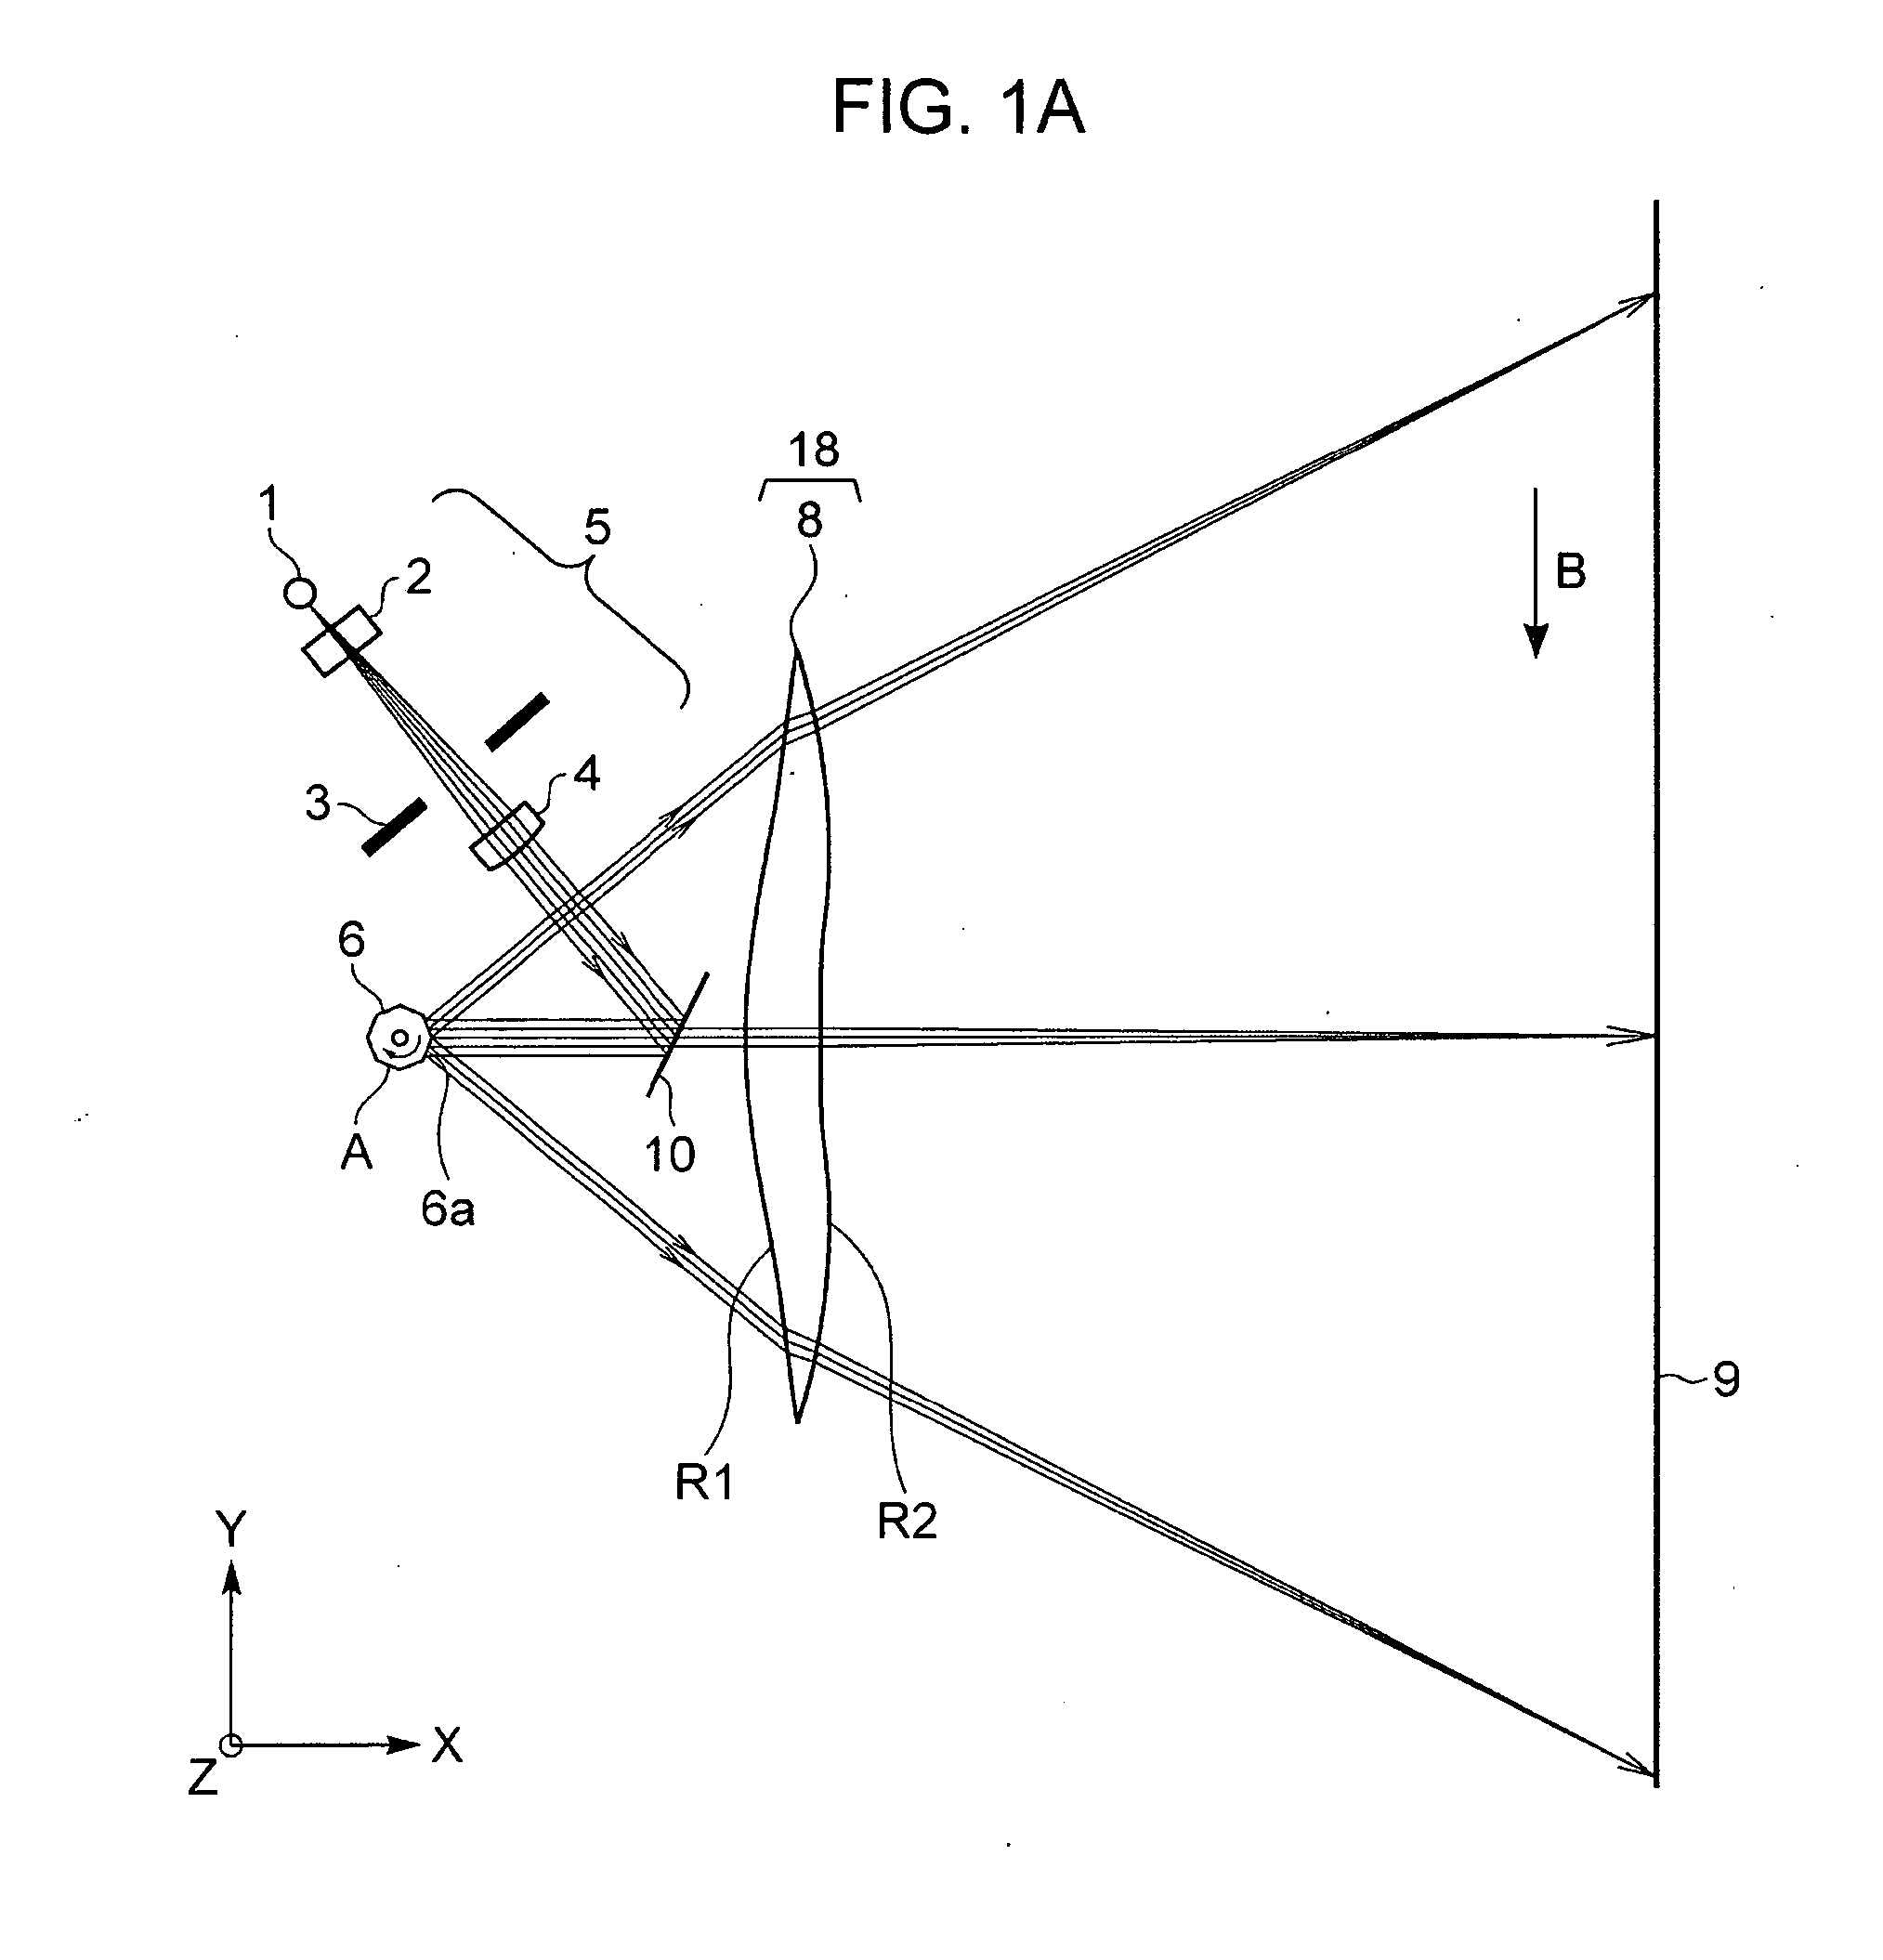 Optical scanning apparatus and image-forming apparatus